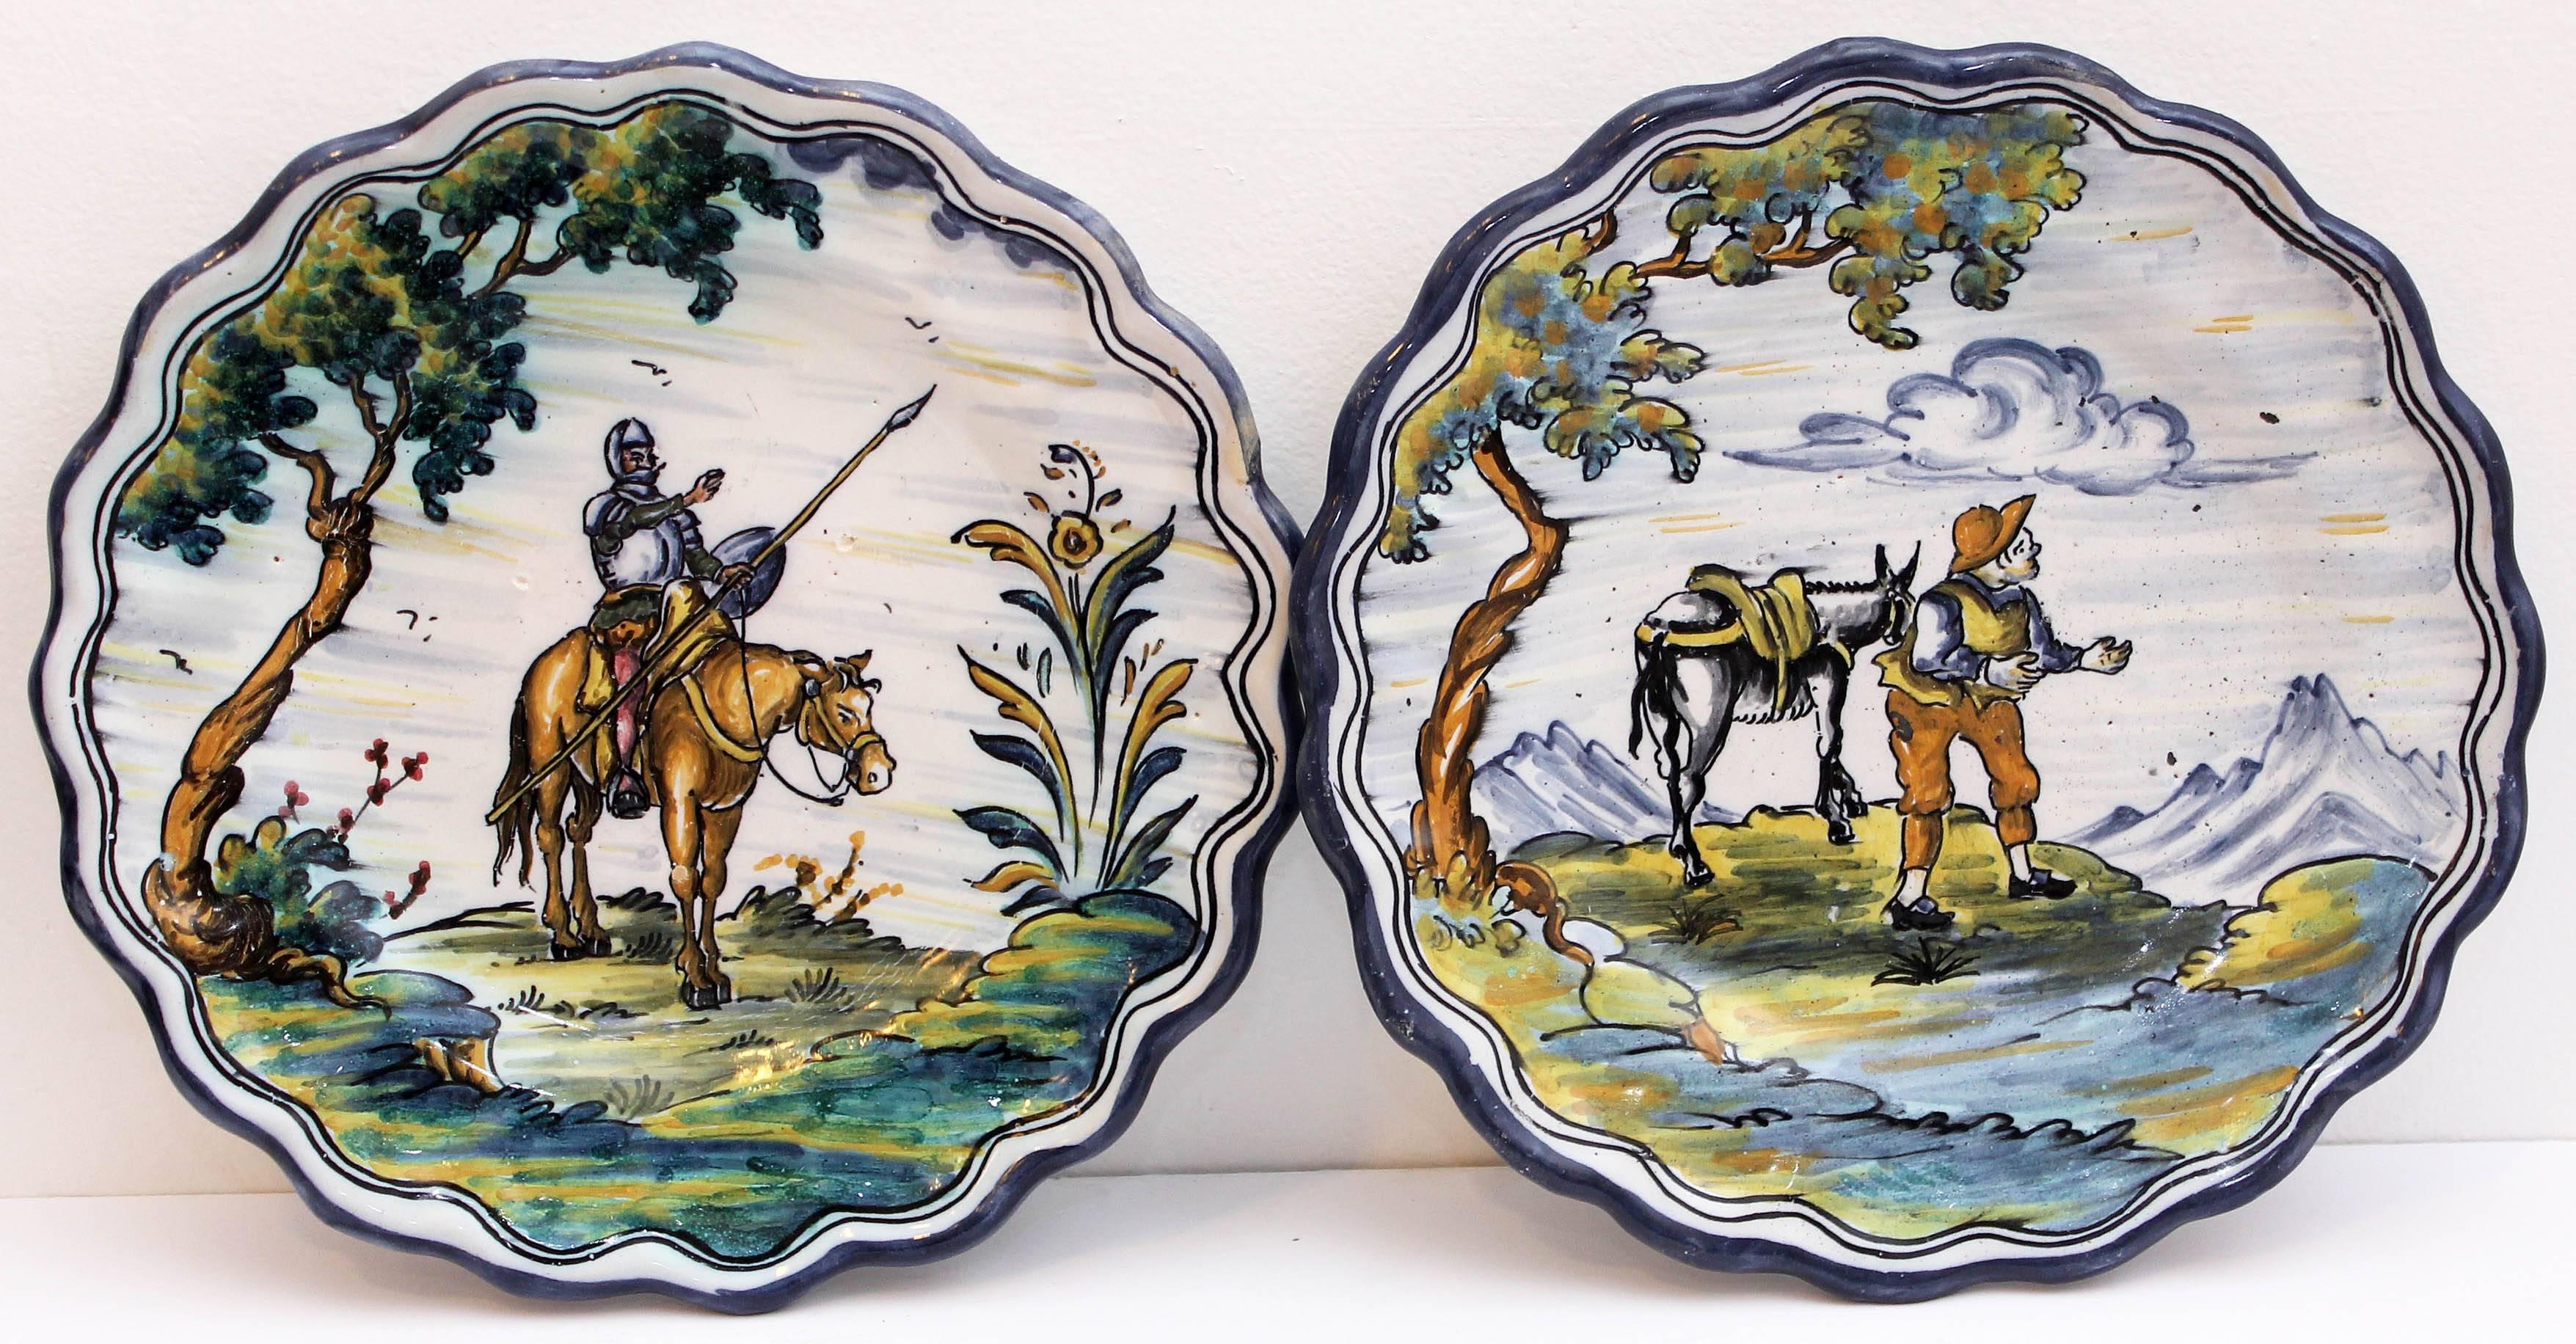 Eight hand-painted dinner plates. Majolica from Talavera, Mexico. Each plate depicts a different scene from the story of Don Quixote.
 